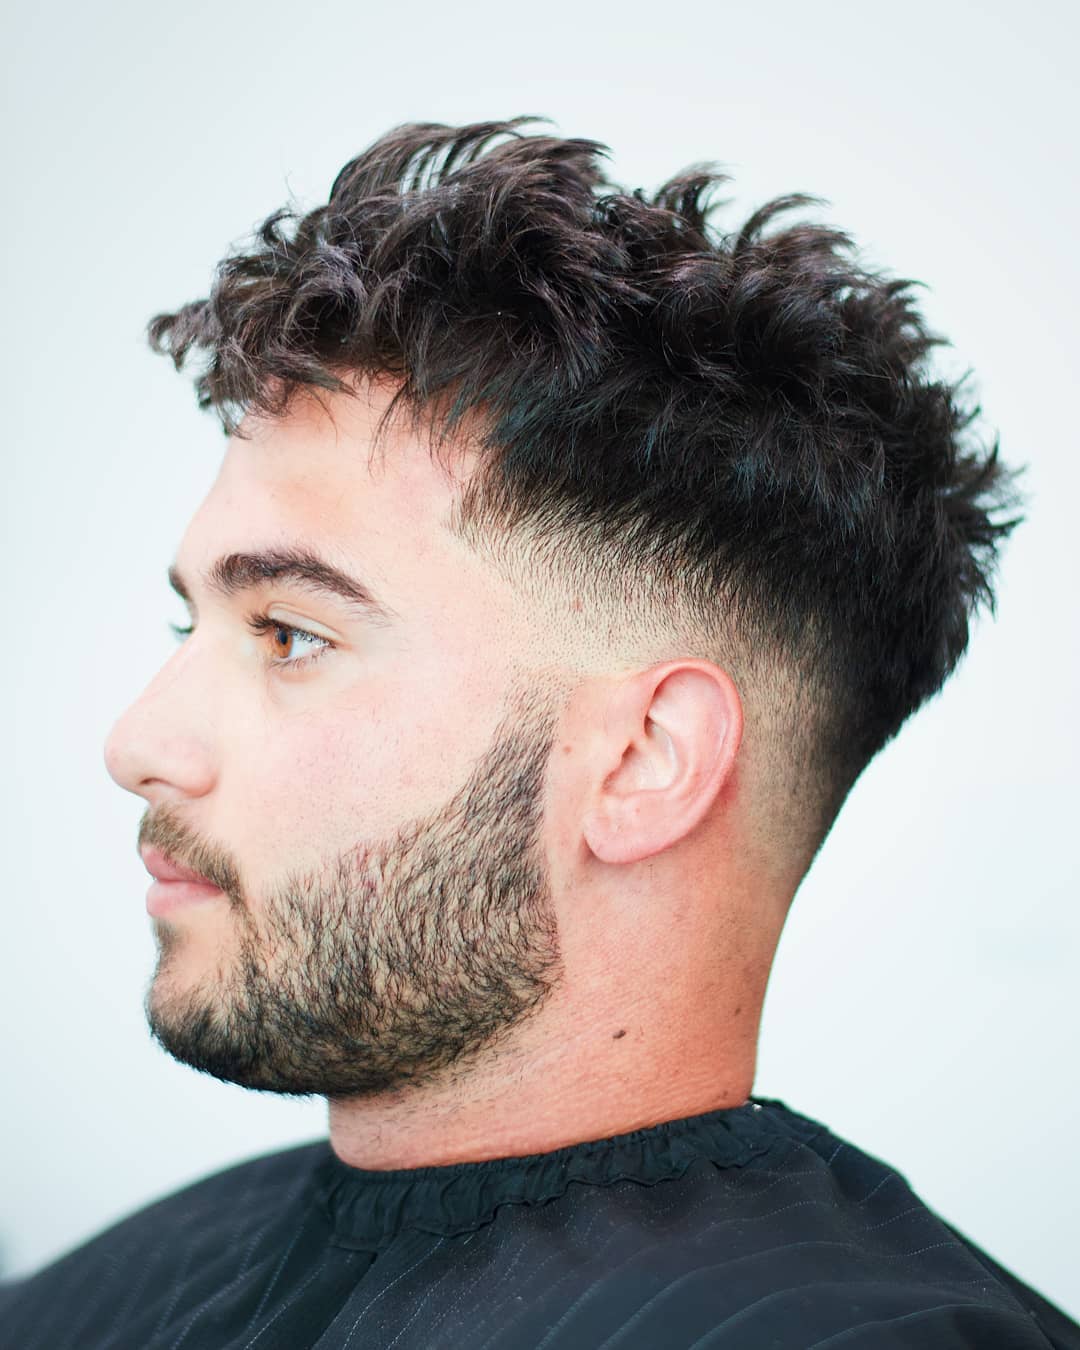 Messy hairstyle for Men 2 Medium messy hairstyles for guys | Messy fade haircut | Messy hairstyles for medium hair Messy hairstyles for Men